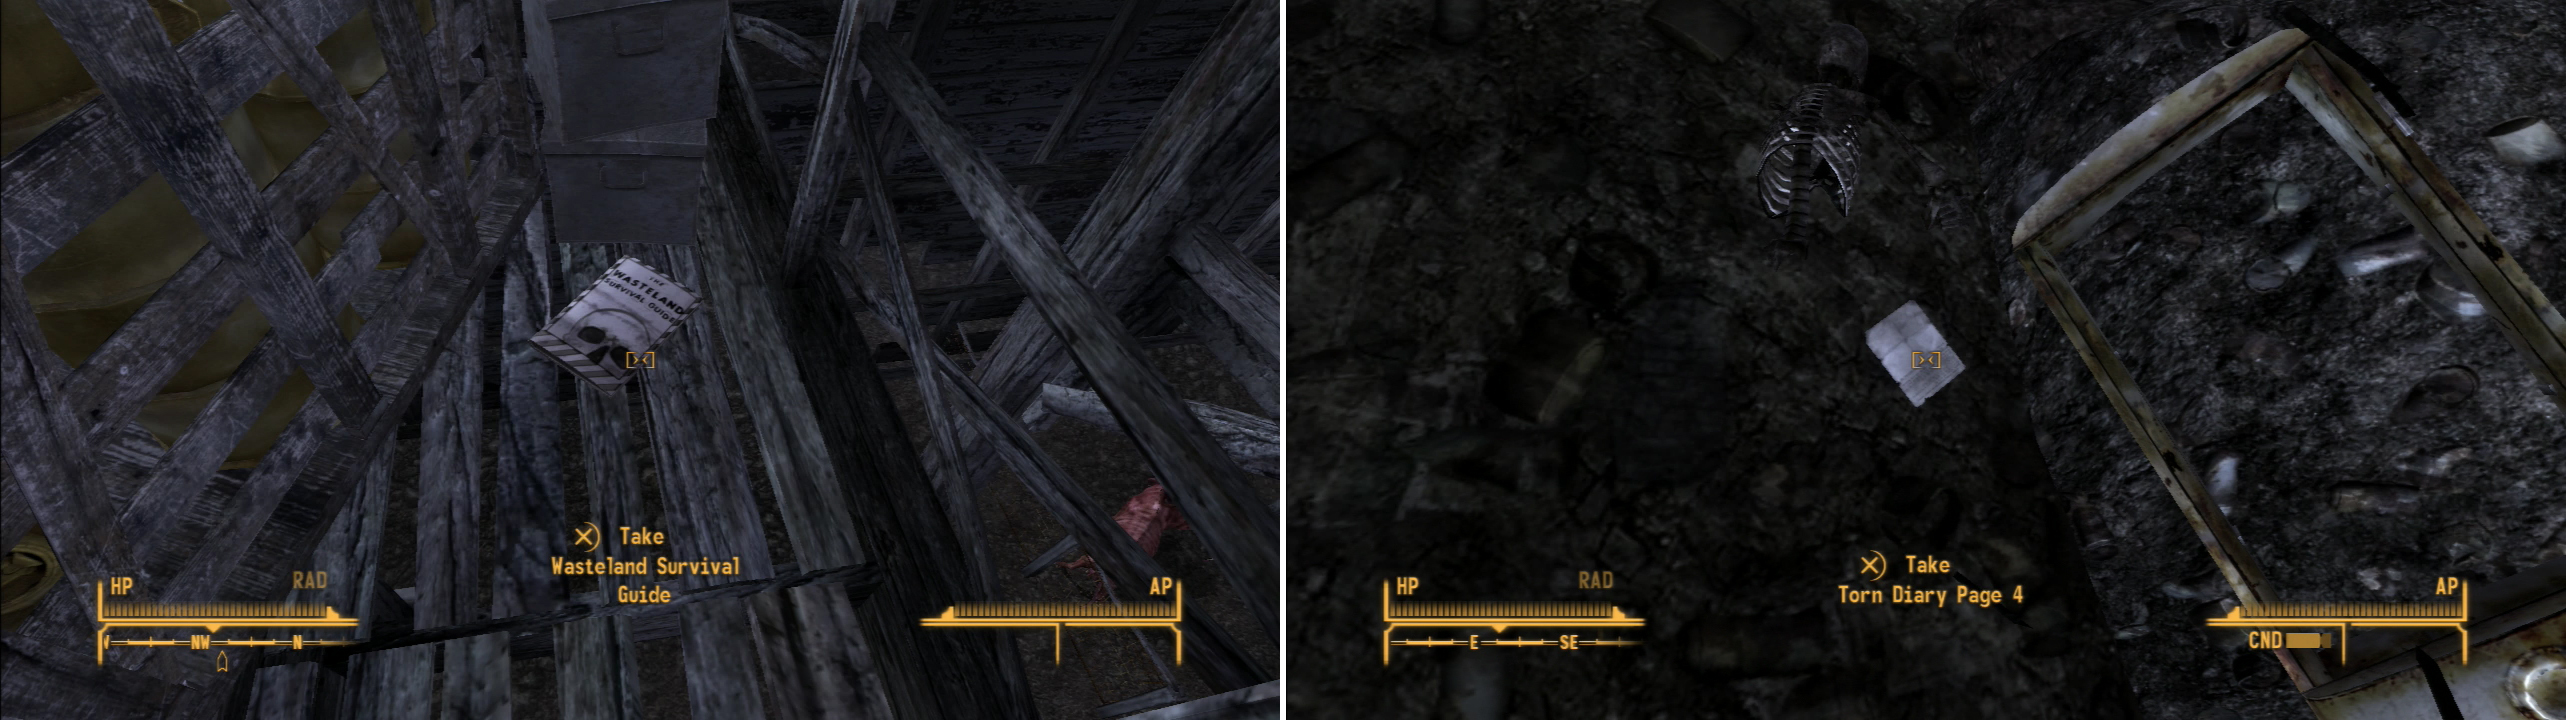 Find a copy of the Wasteland Survival Guide in the loft of the barn (left). The various diary page you find lying around reveal what happened at this farm (right).